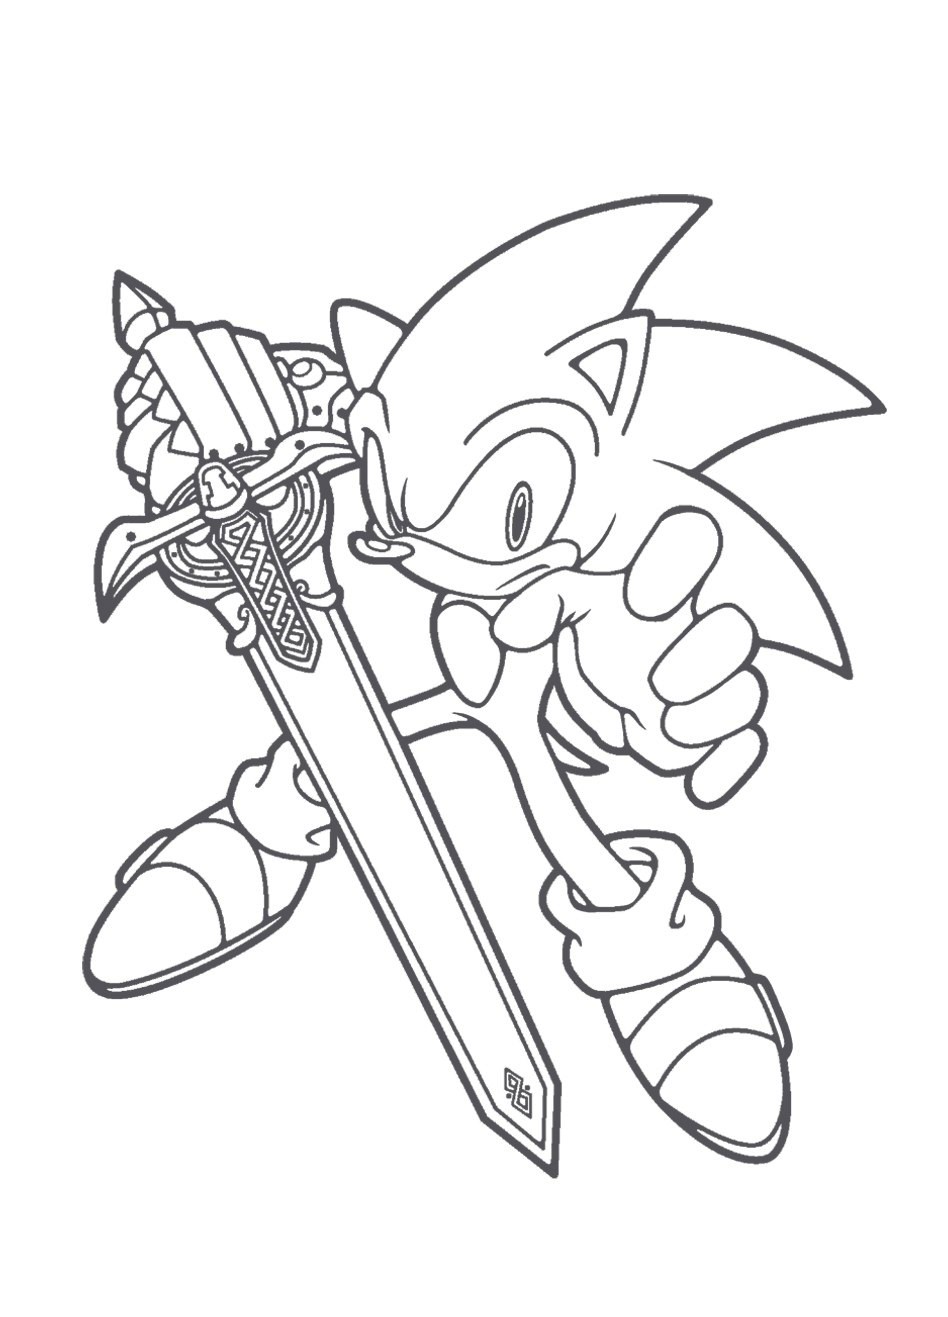 Sonic the Hedgehog Coloring Pages | 360ColoringPages